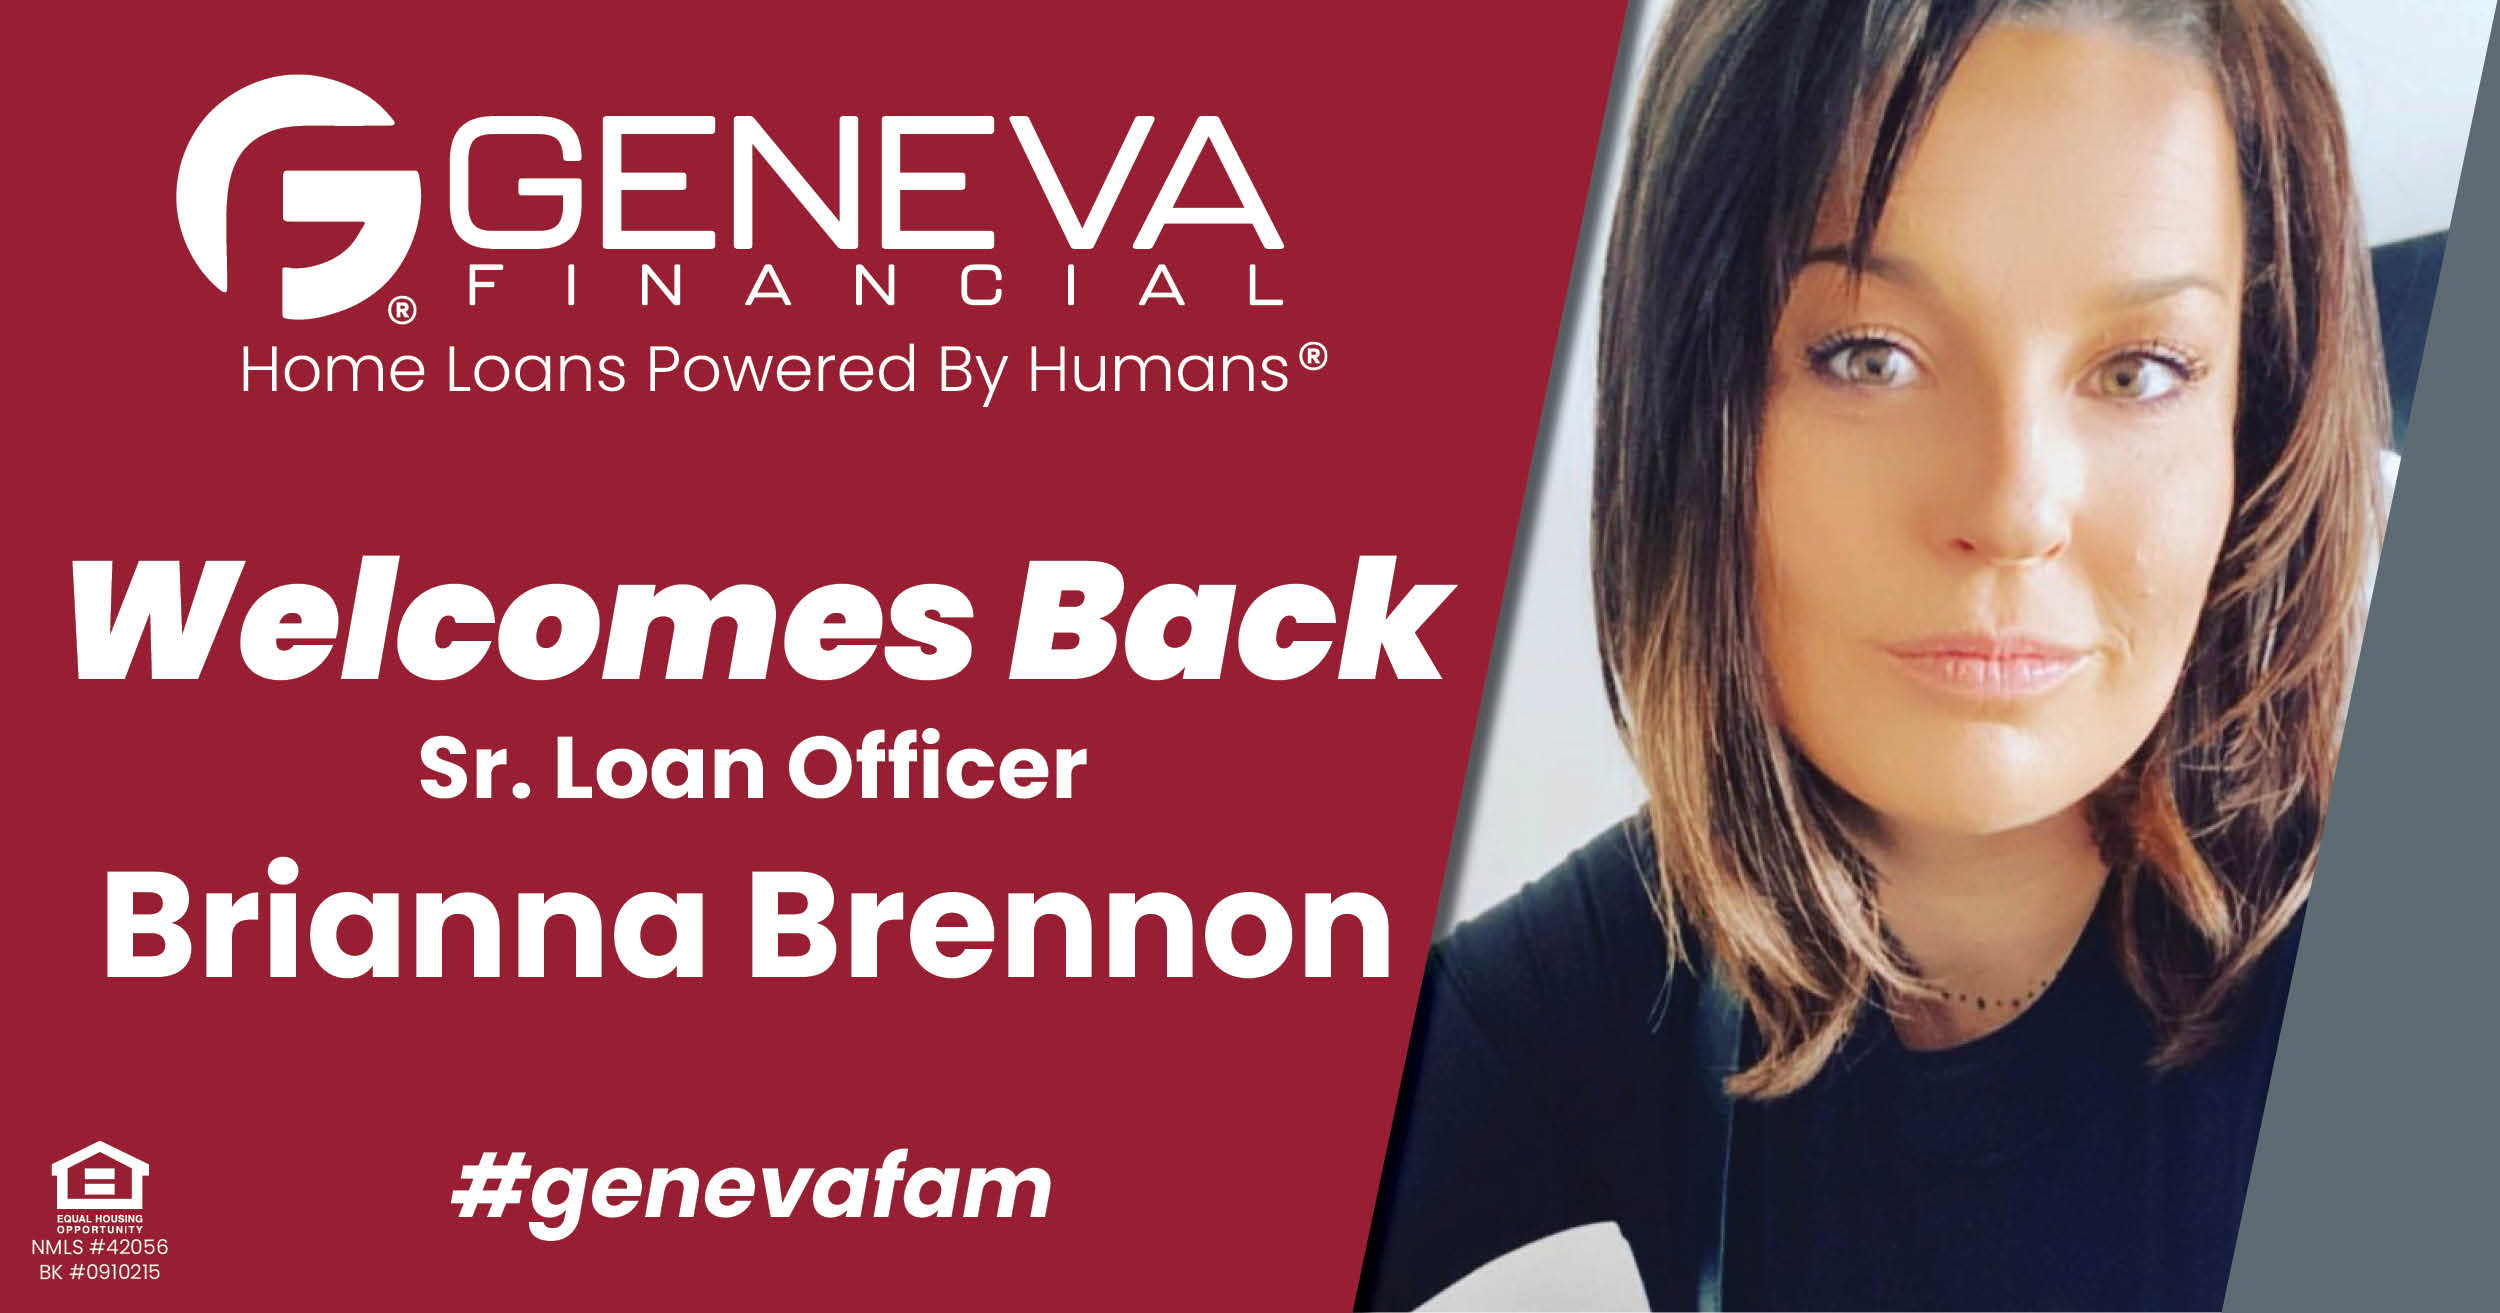 Geneva Financial Welcomes Back Sr. Loan Officer Brianna Brennon to Phoenix, Arizona– Home Loans Powered by Humans®.